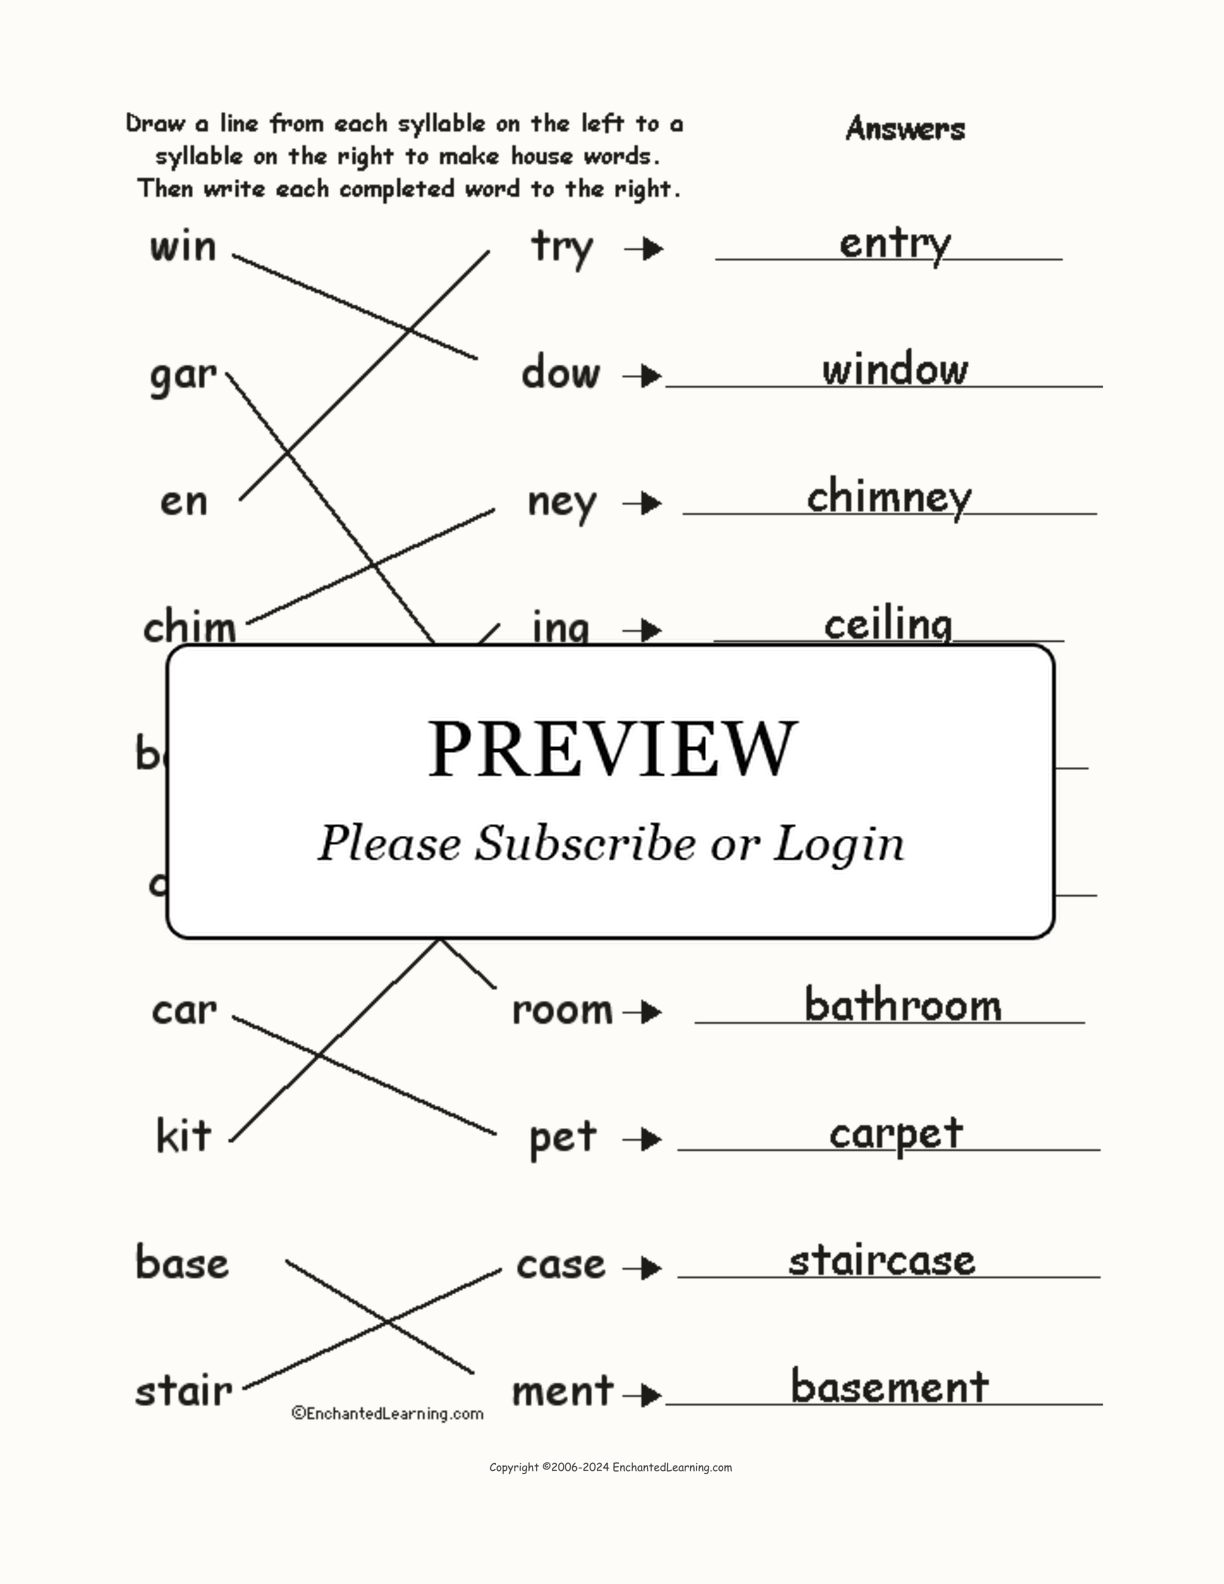 Match the Syllables: House Words interactive worksheet page 2